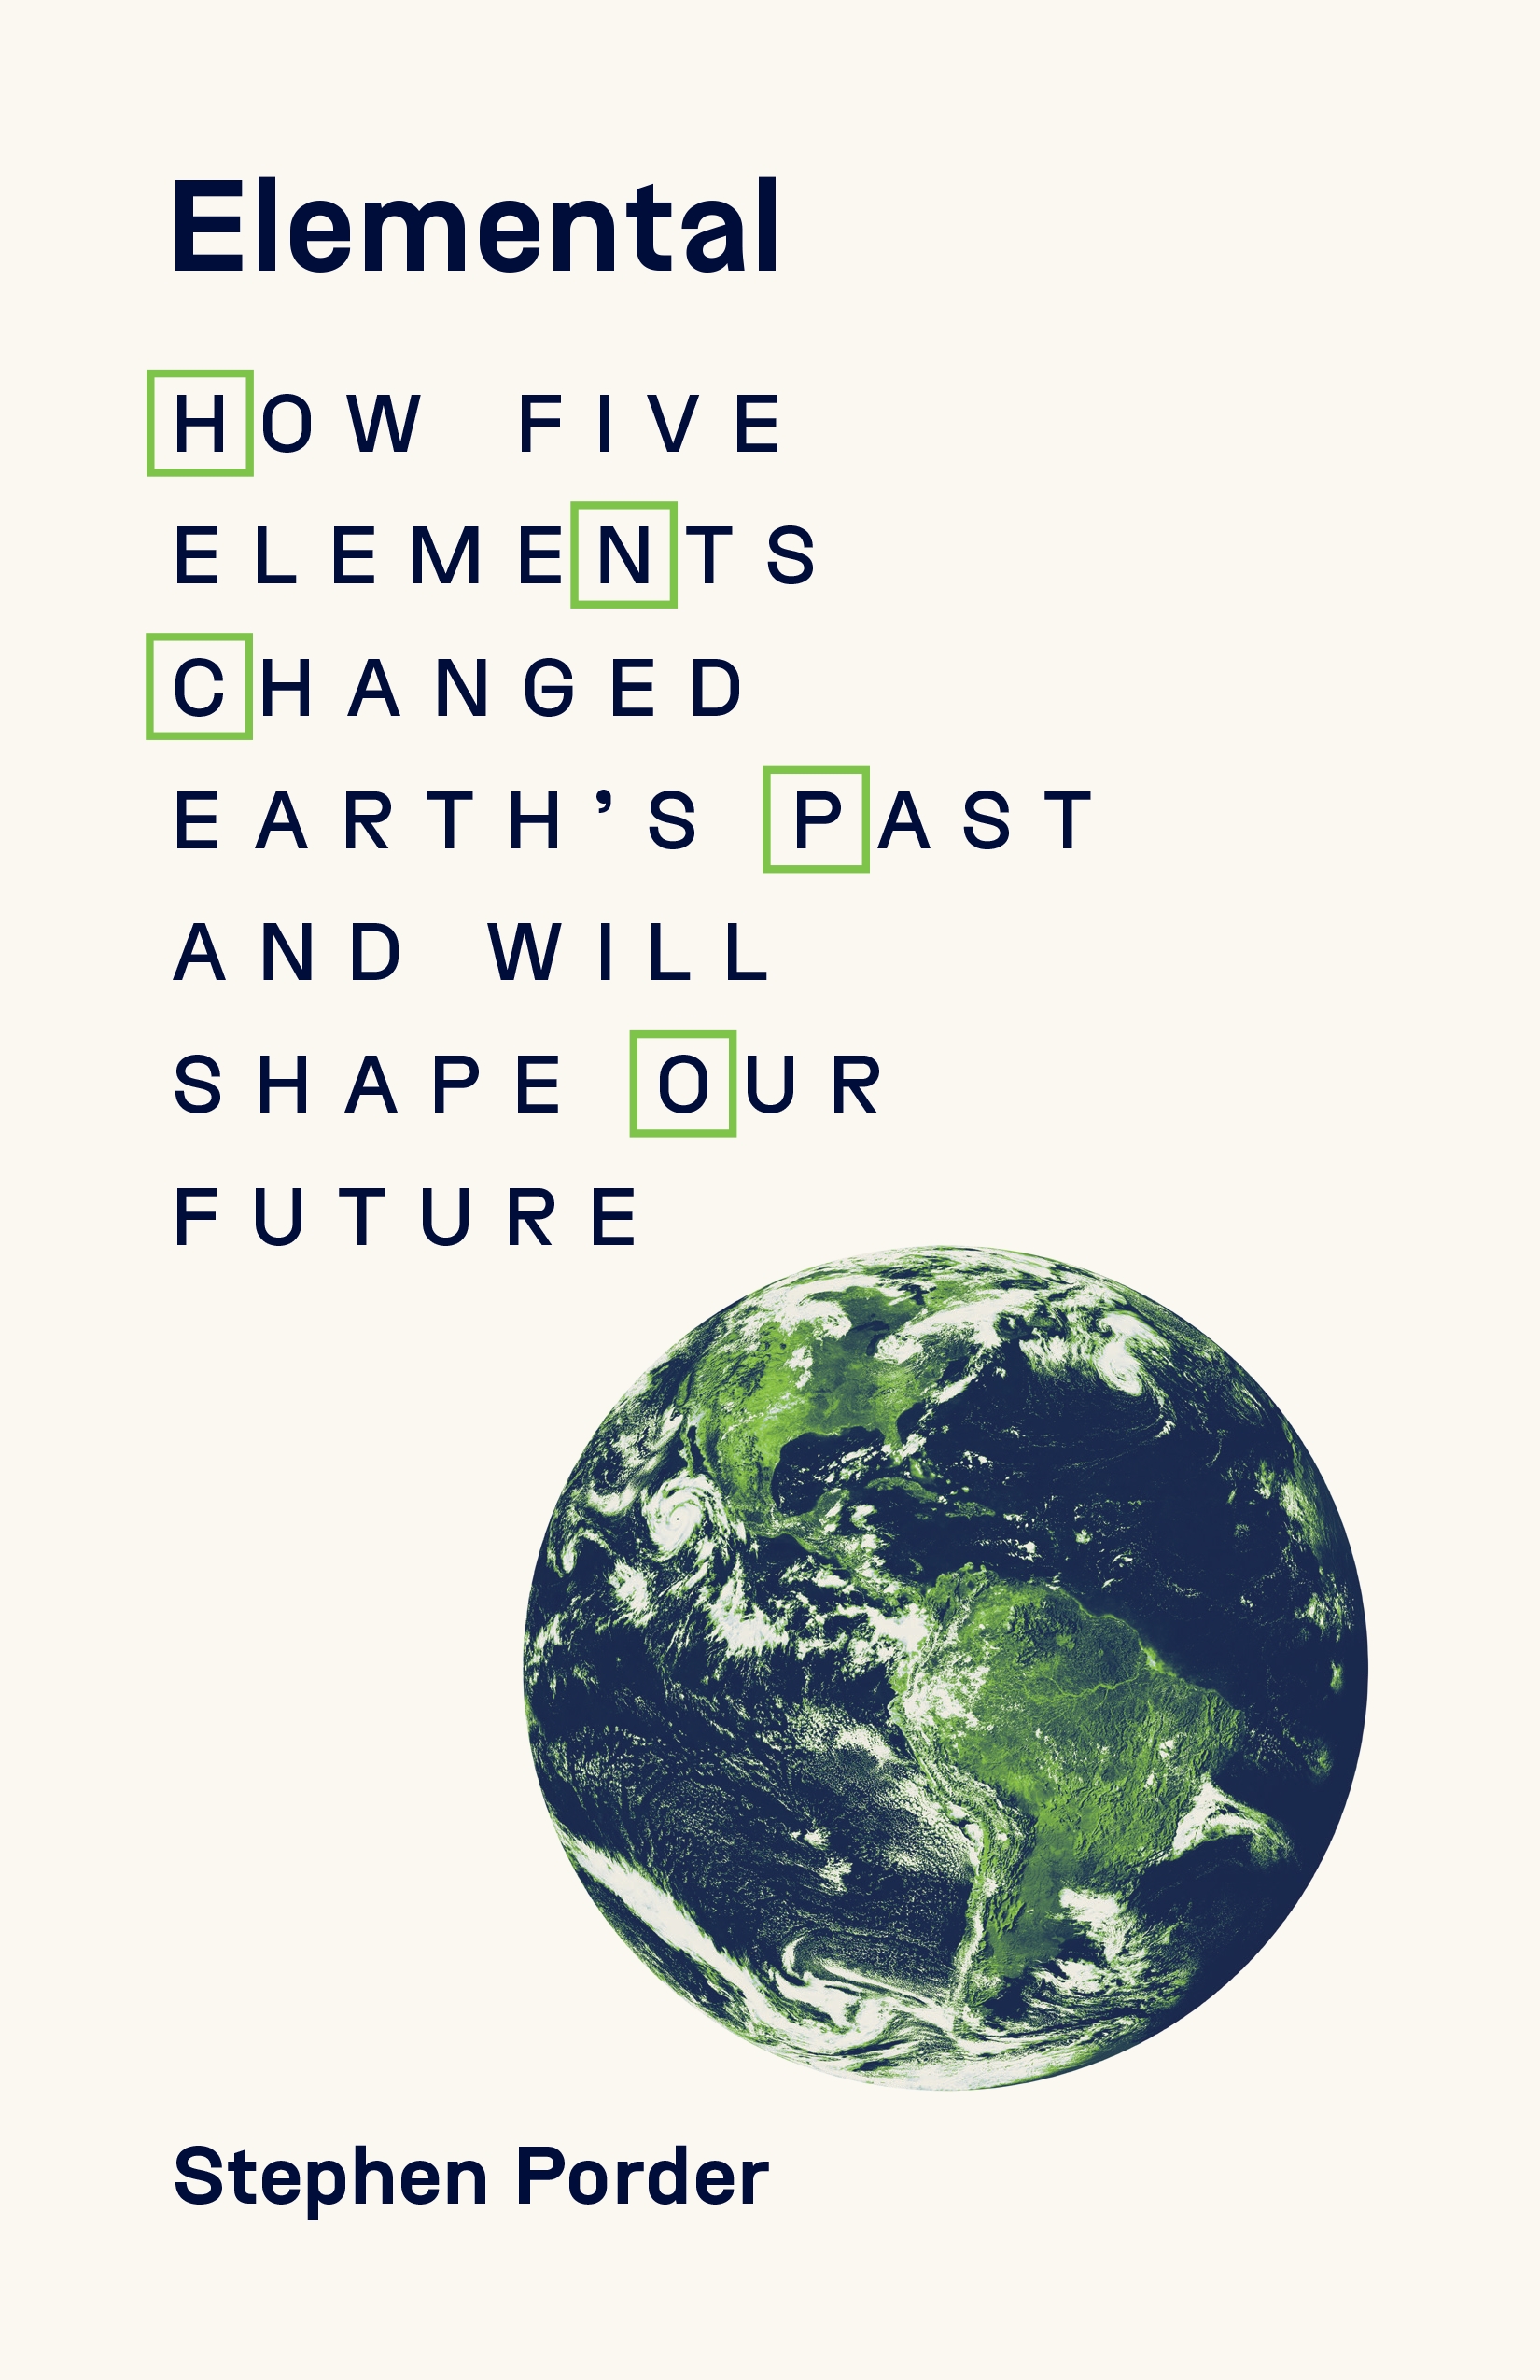 Climate: Past, Present & Future  Learning lessons from the past to inform  the future